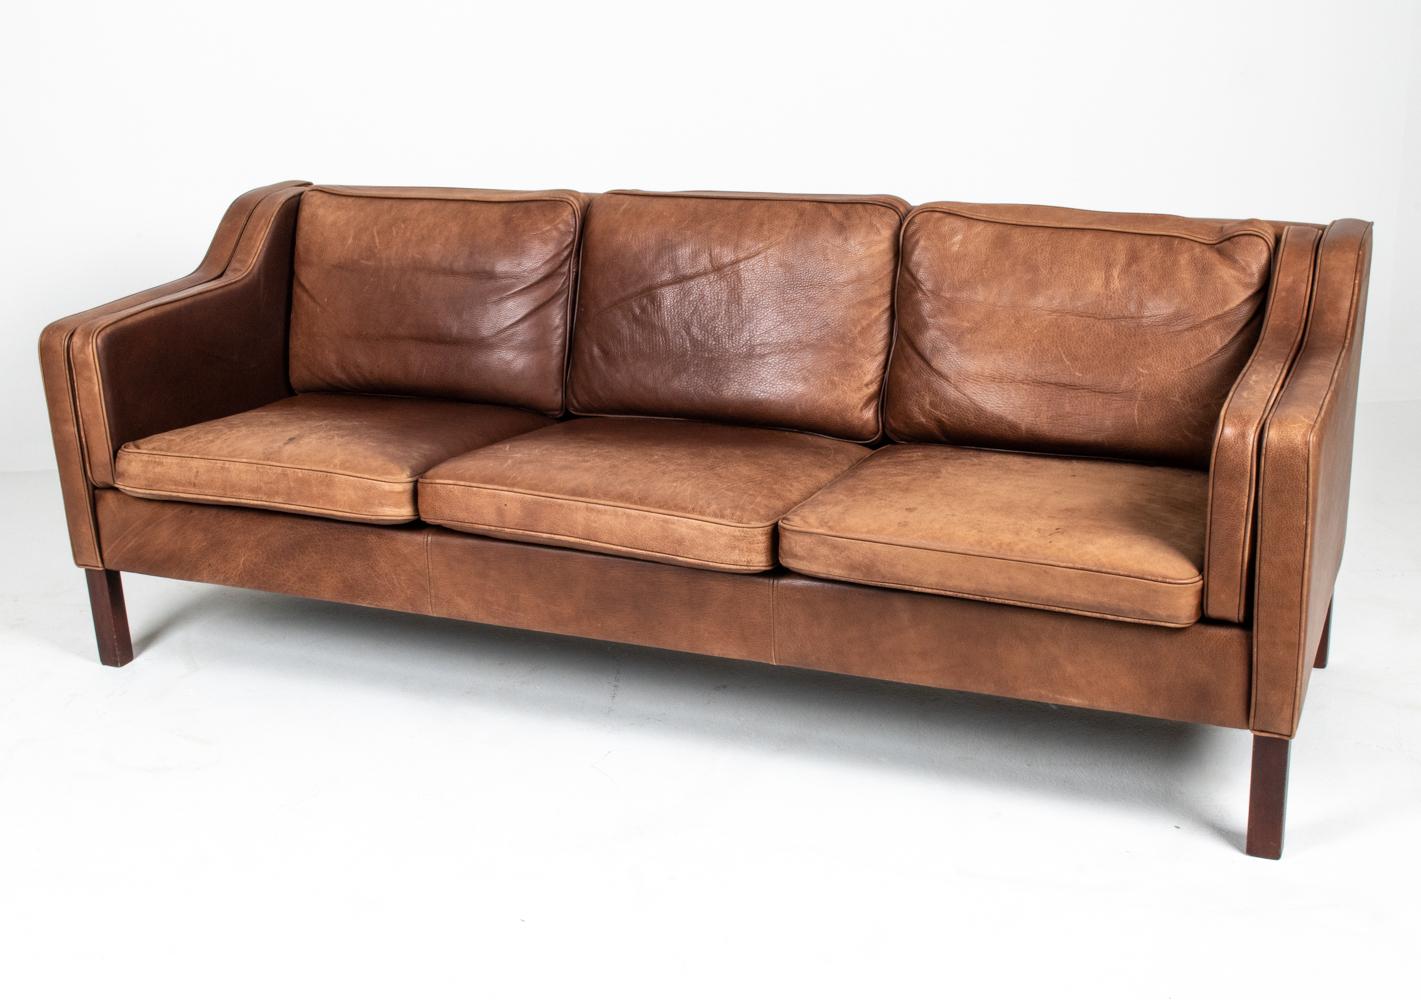 Celebrated for its ideal proportions, fine craftsmanship and ultimate comfort, the Mogens Hansen leather sofa has been a continuous design favorite for over four decades. This example features dark stained beechwood legs and distressed brown leather